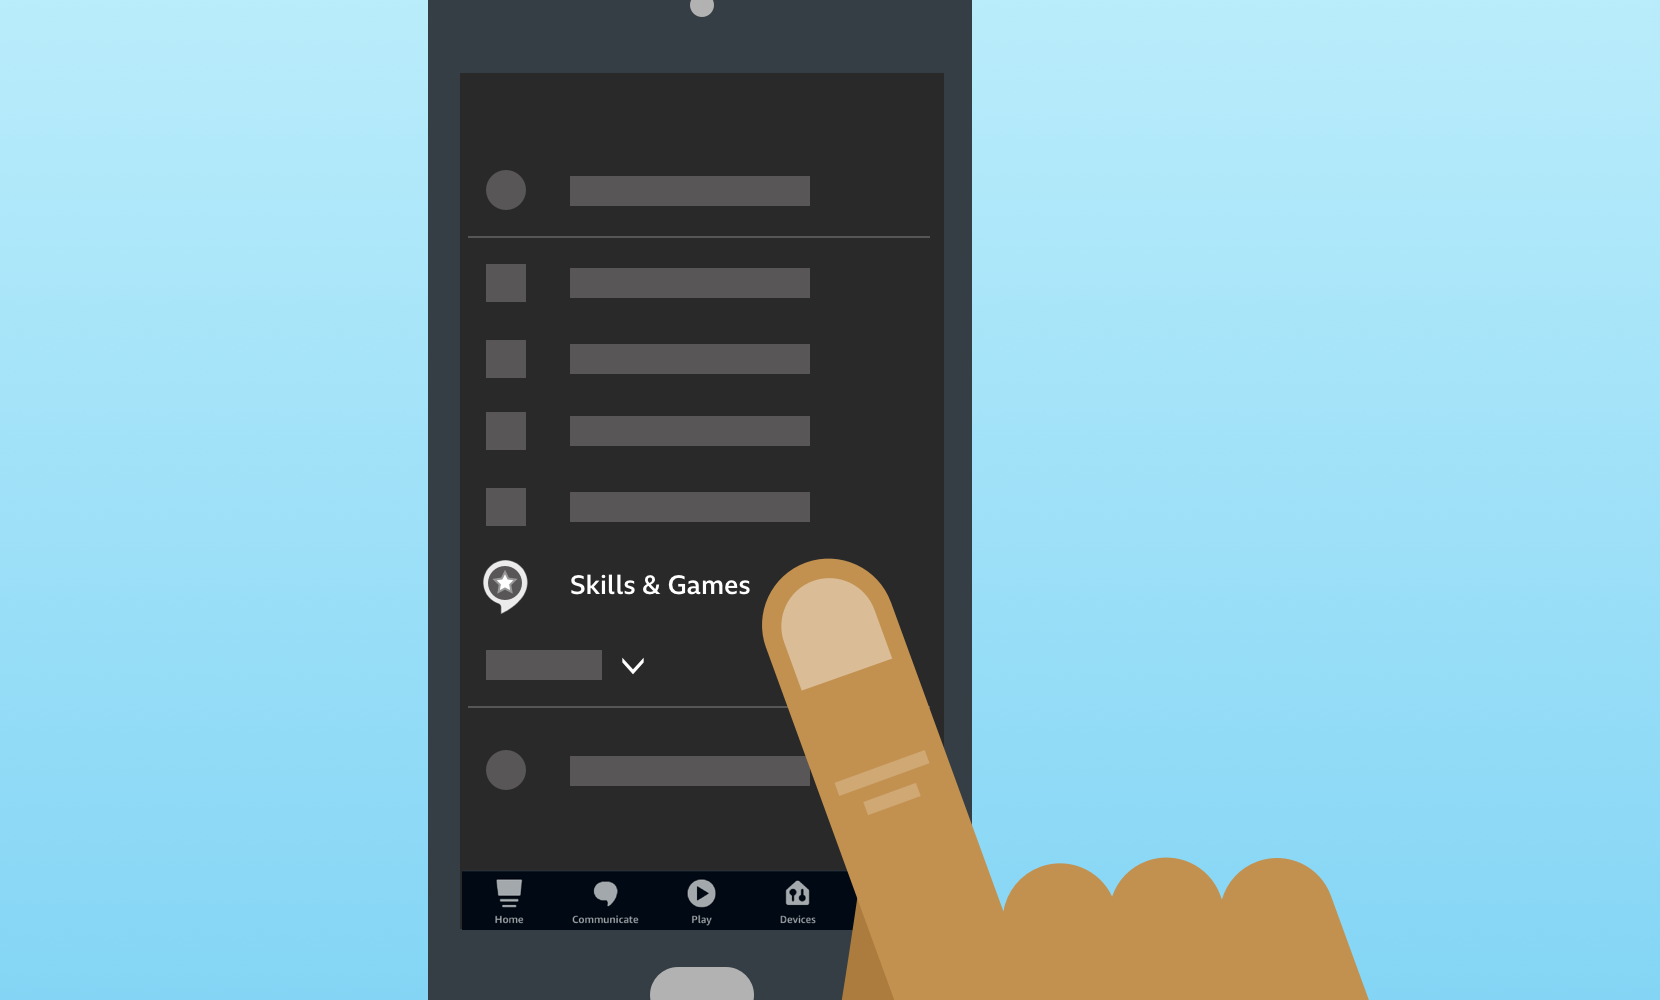 Illustration of a person holding a phone. The phone is on the Alexa app and the 'Skills & Games' button is highlighted